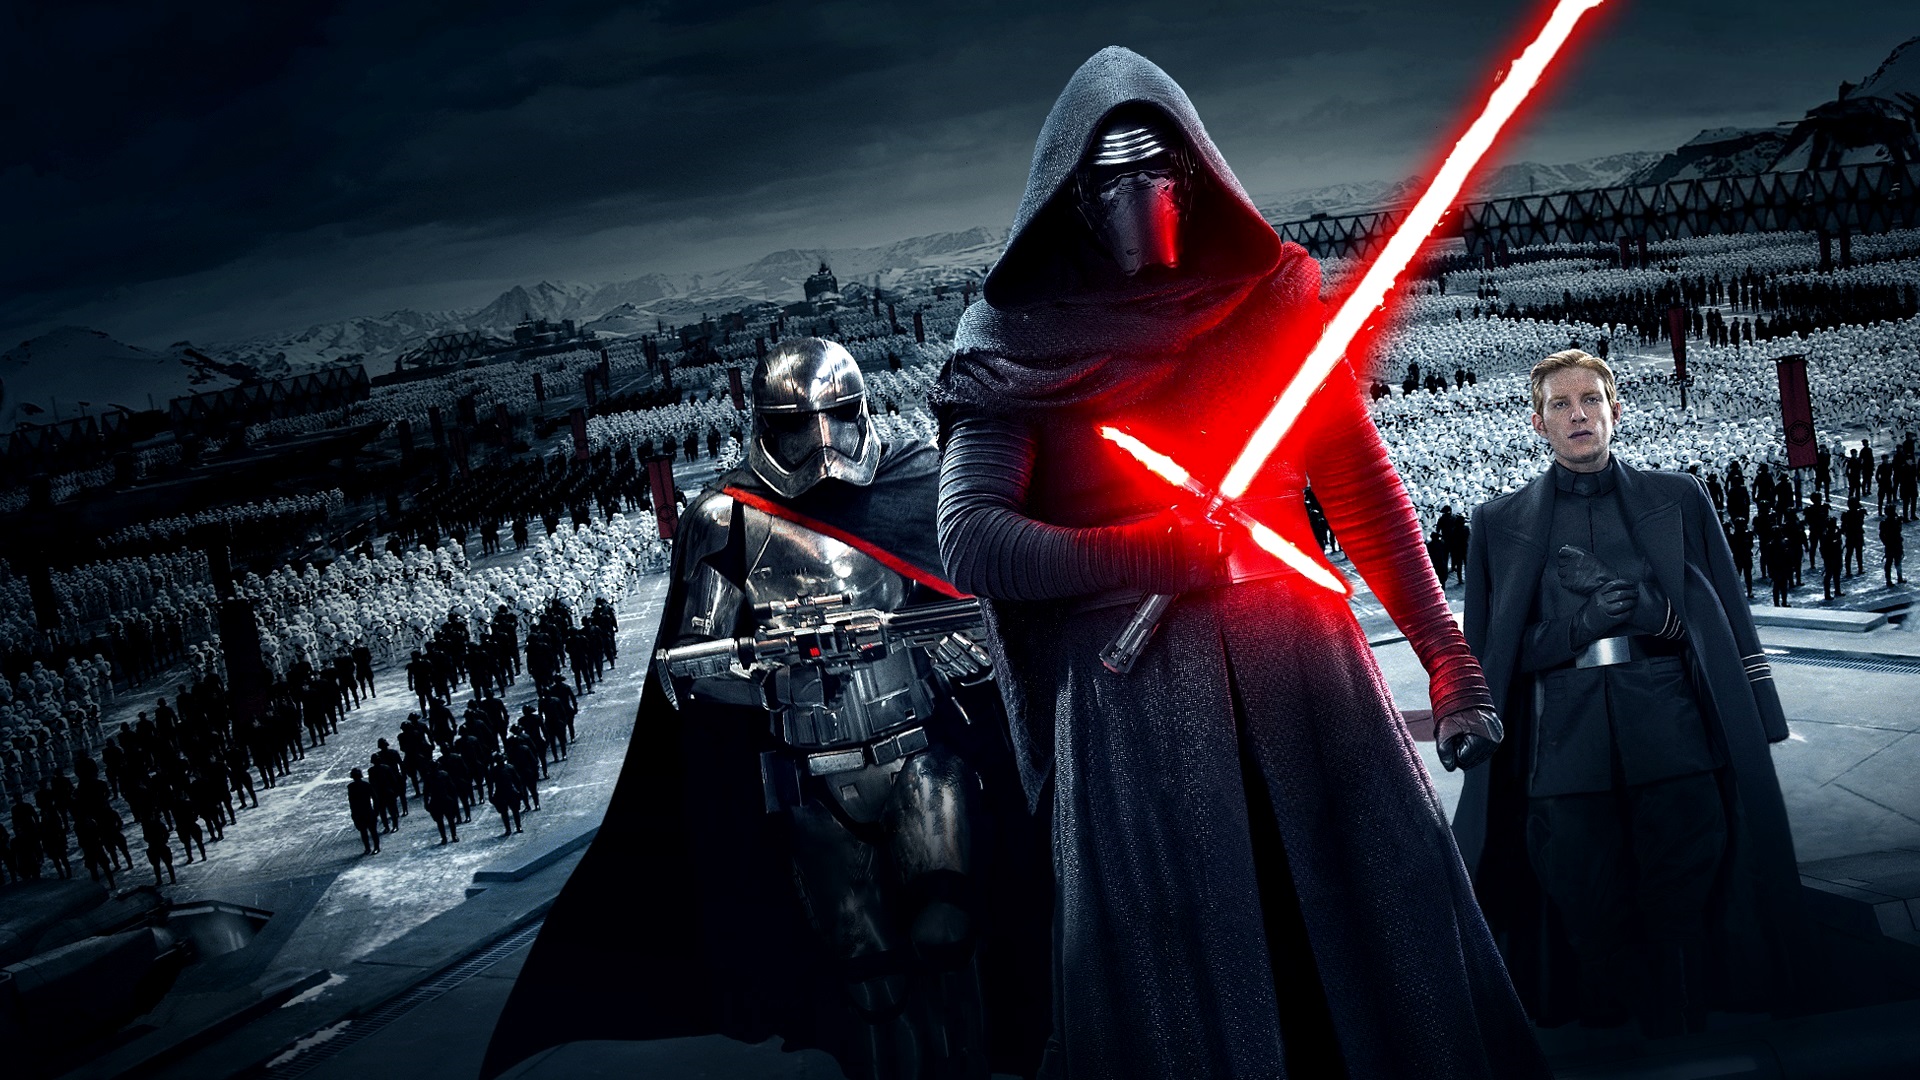 Force Awakens Wallpapers We provide the Best Quality HD wallpapers